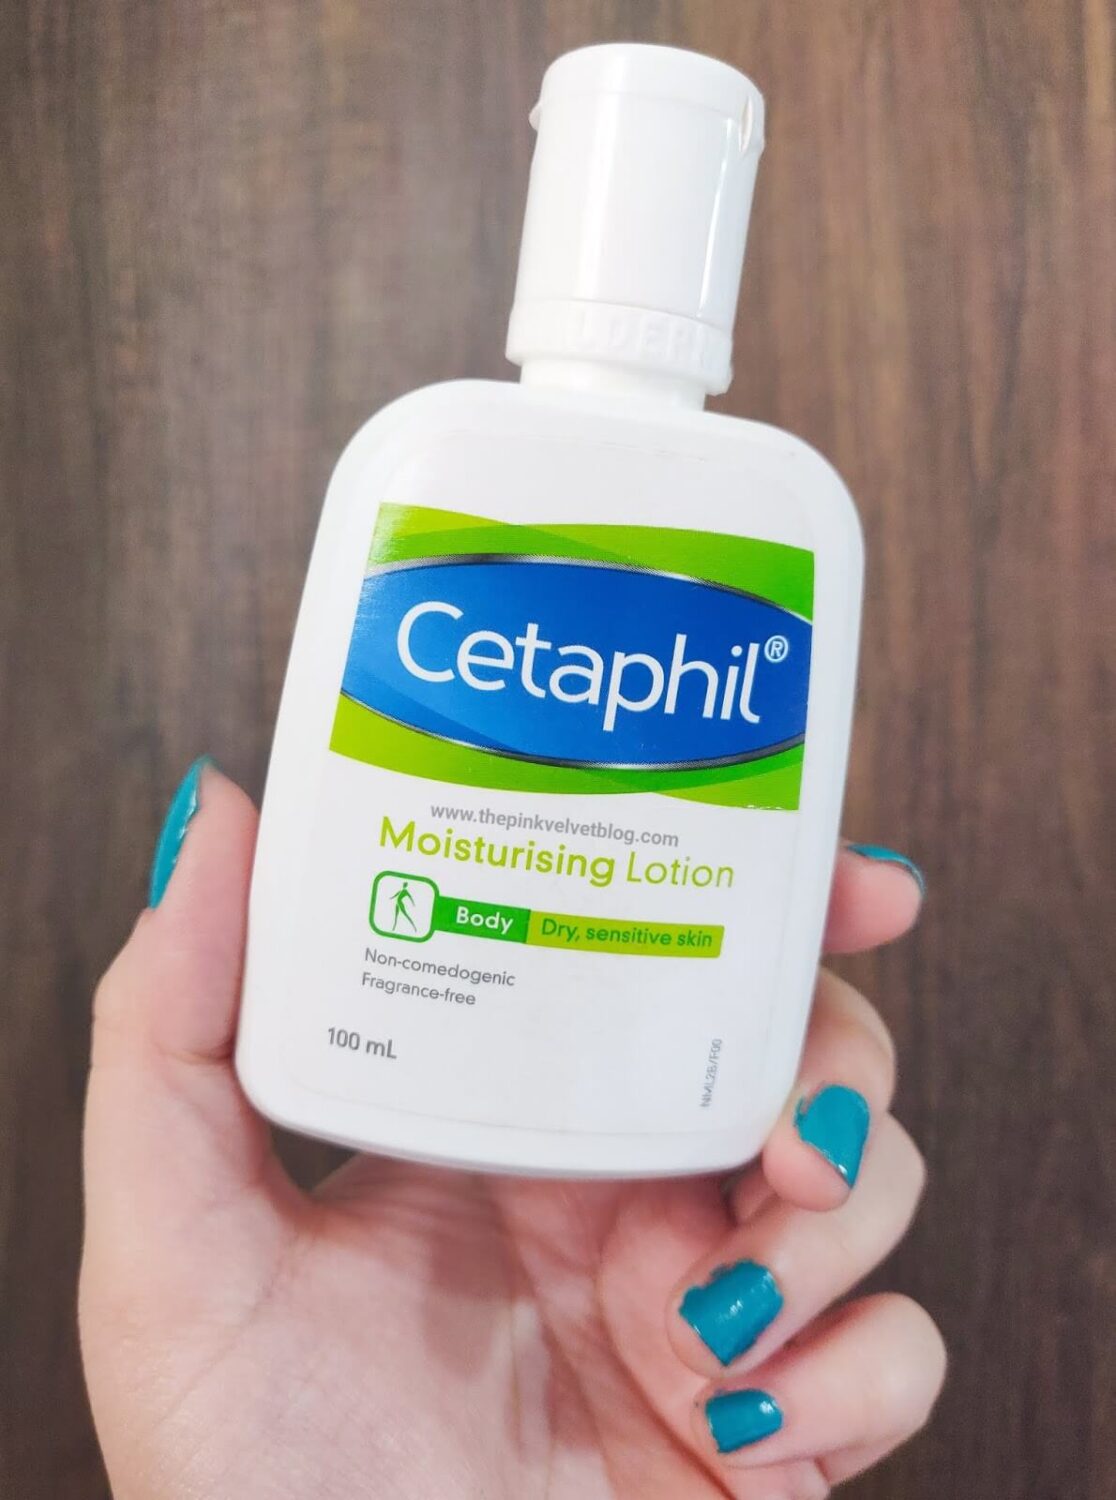 Cetaphil Moisturizing Lotion for Dry Sensitive Skin Review scaled 1